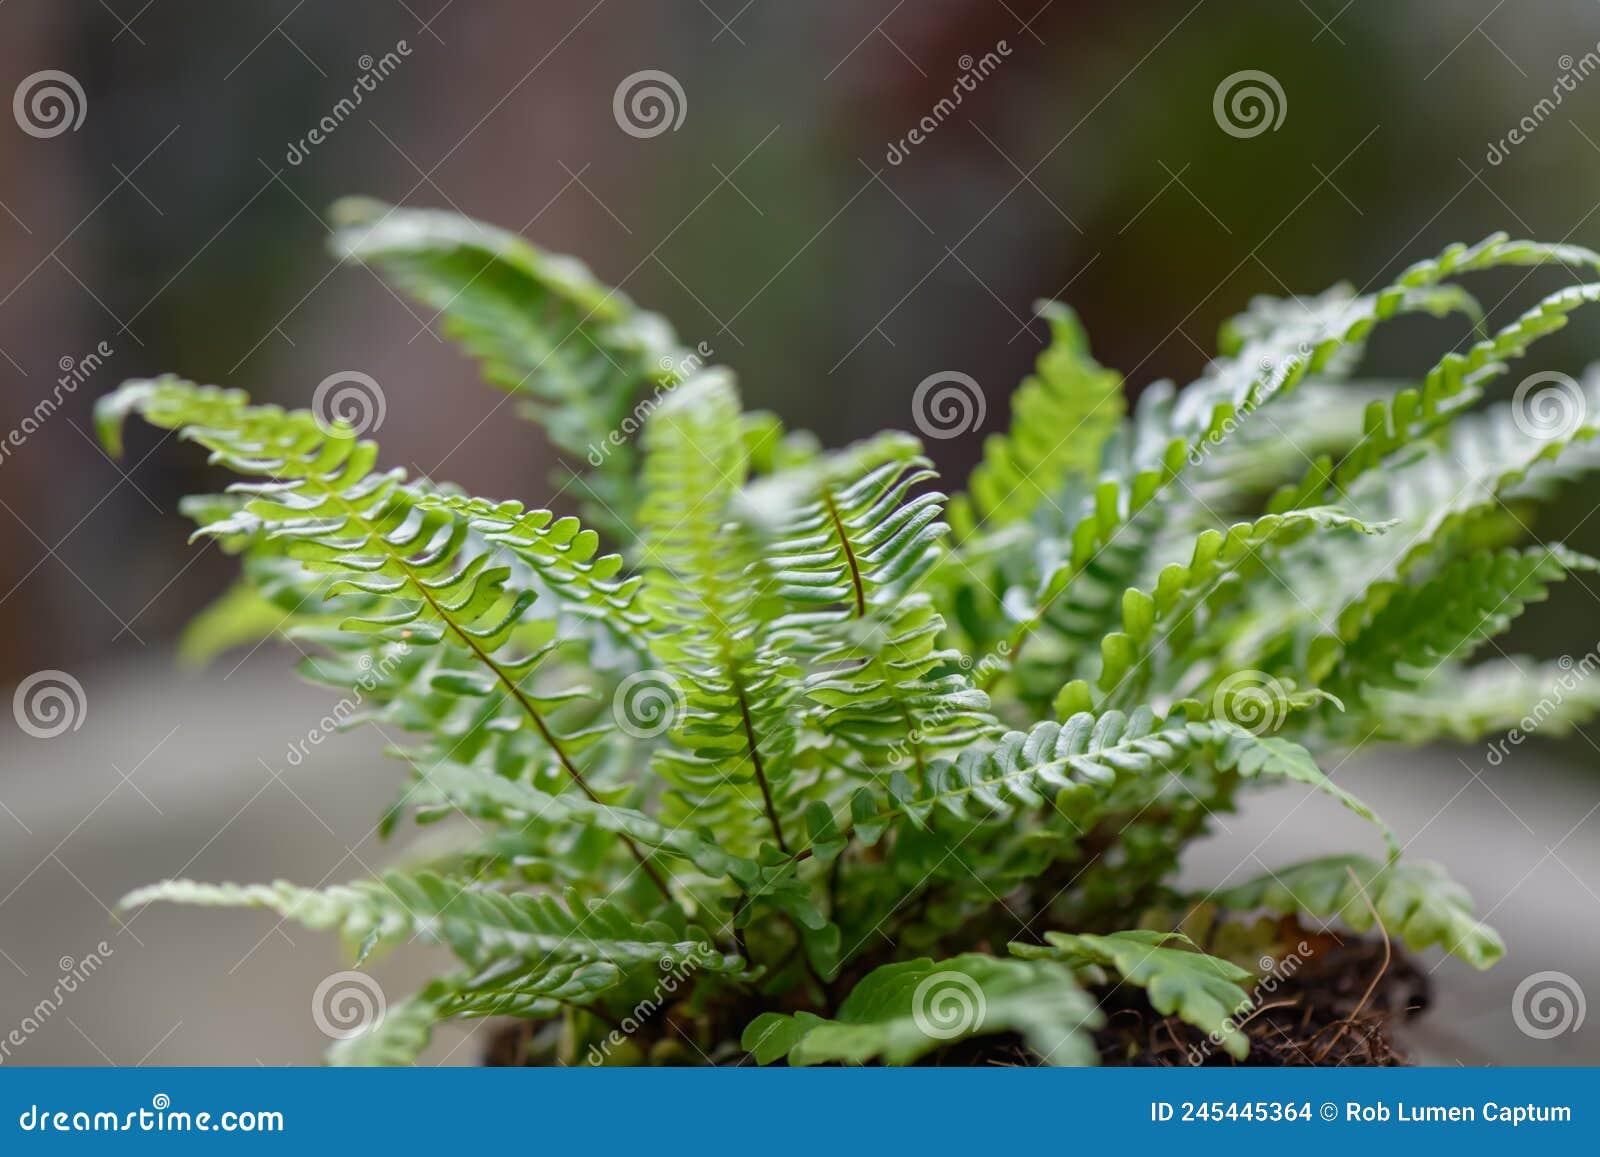 deer fern struthiopteris spicant, young plant